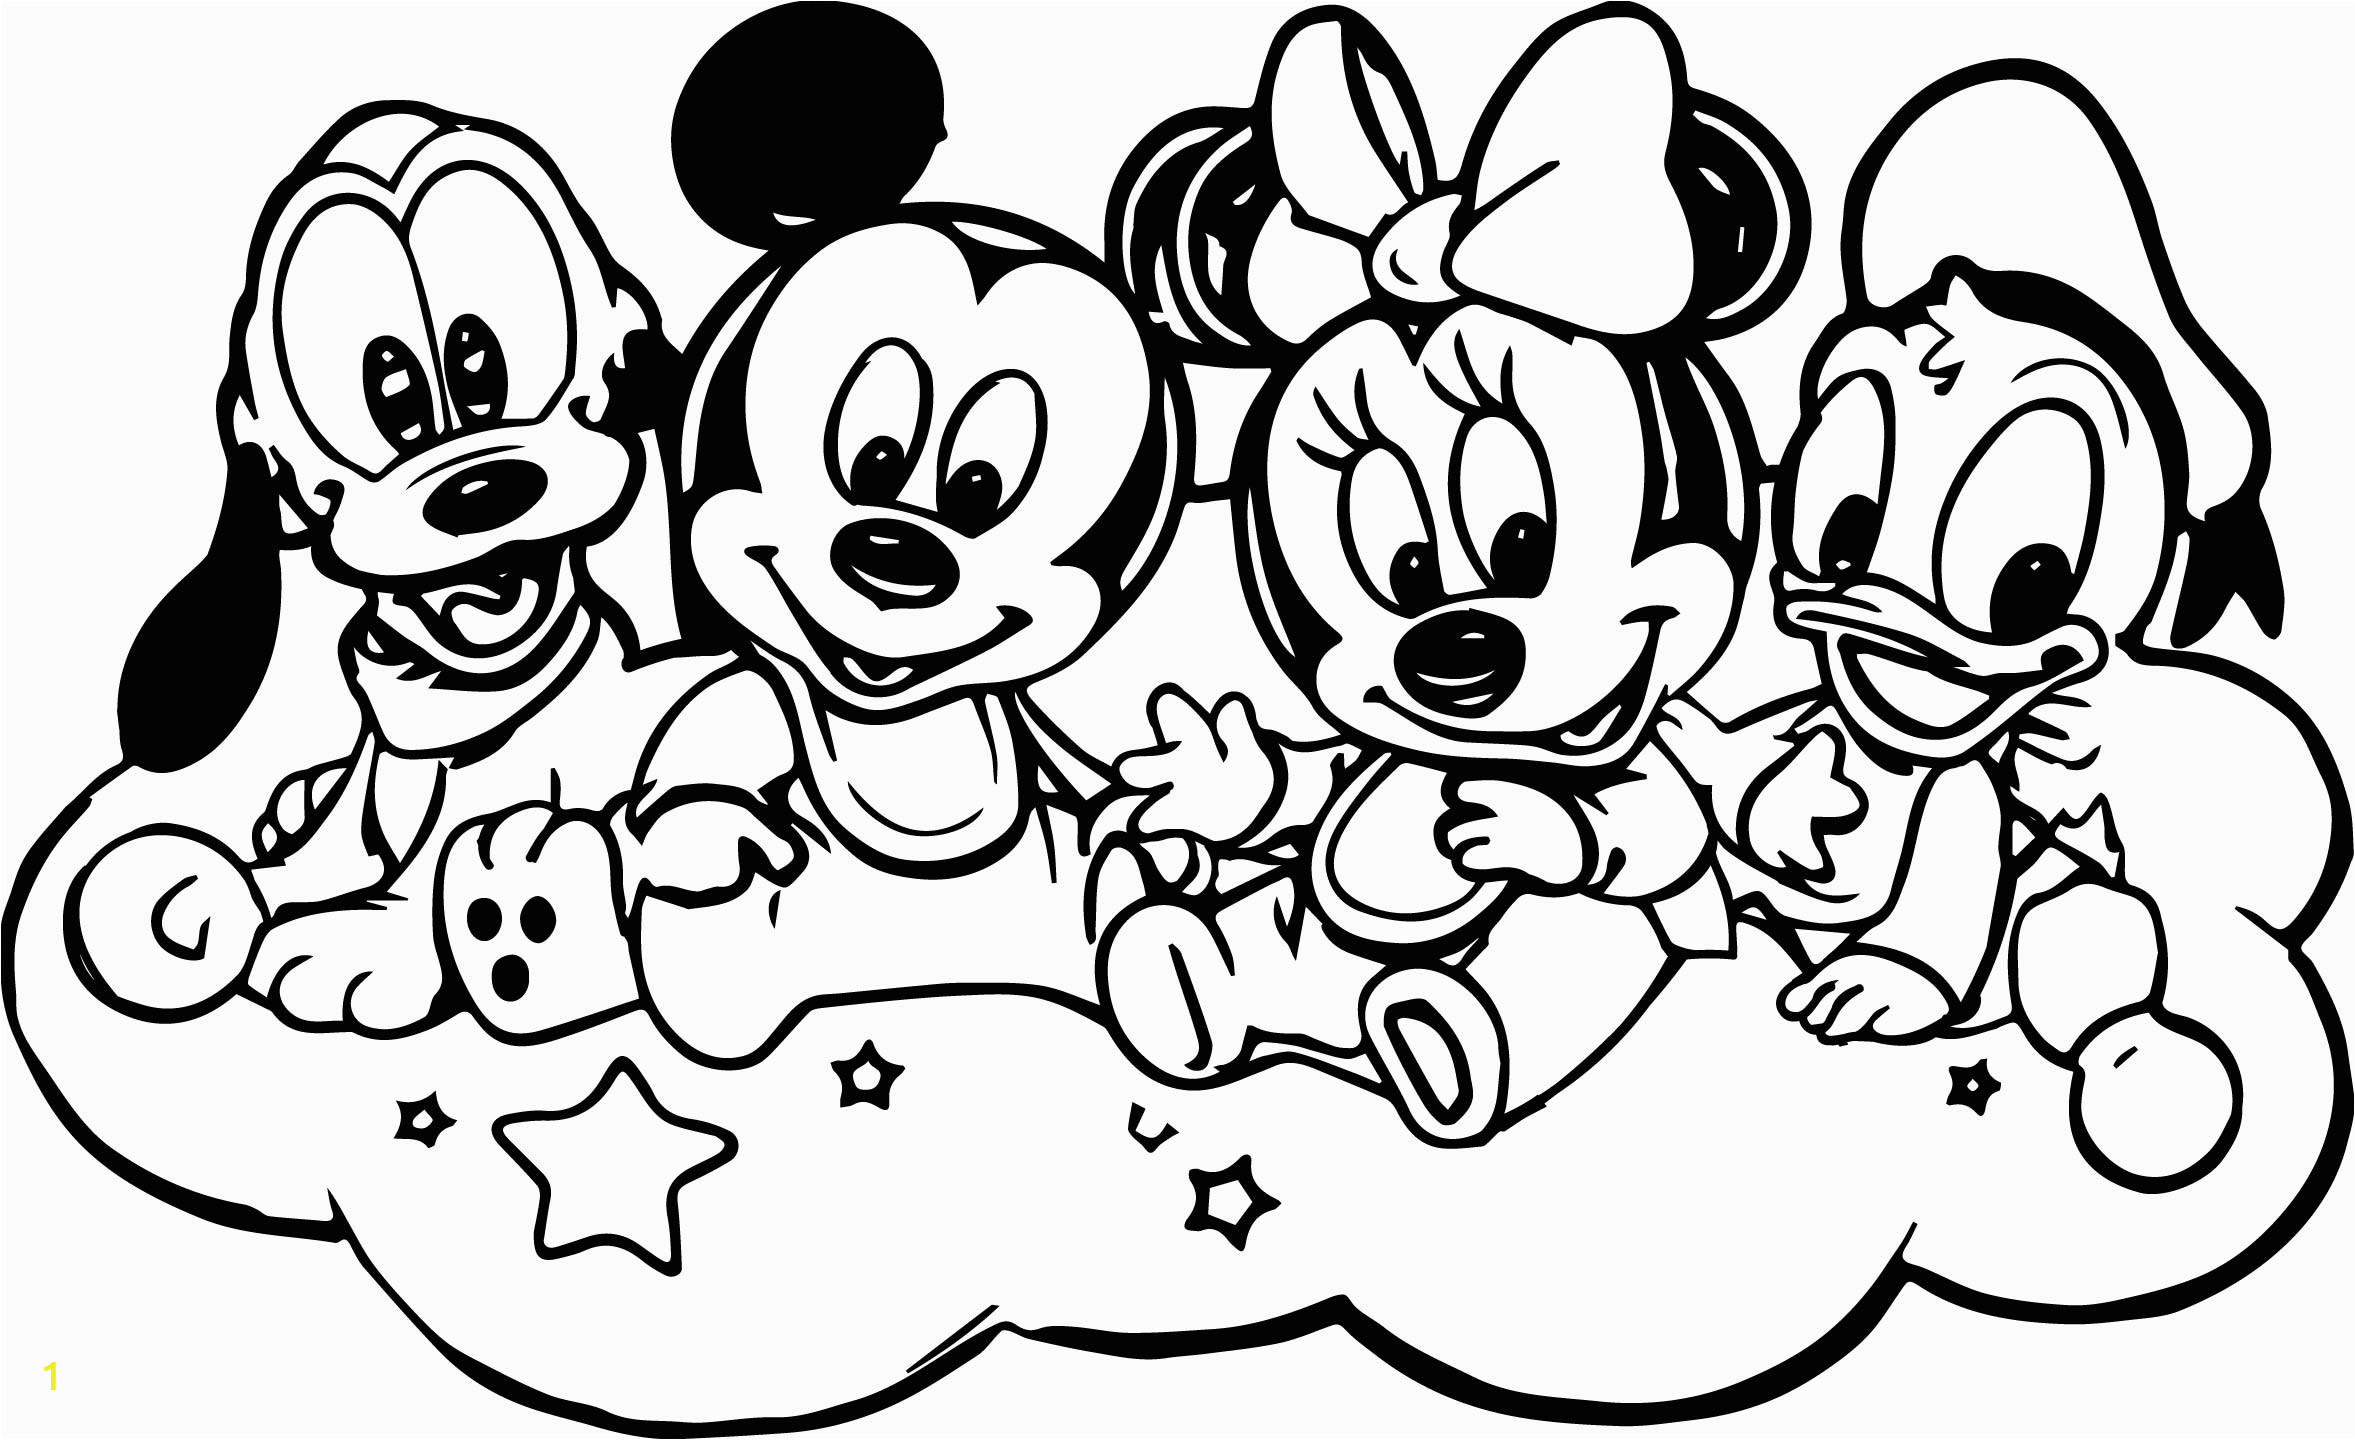 Baby Mickey Mouse and Friends Coloring Pages Baby Mickey and Friends Coloring Page